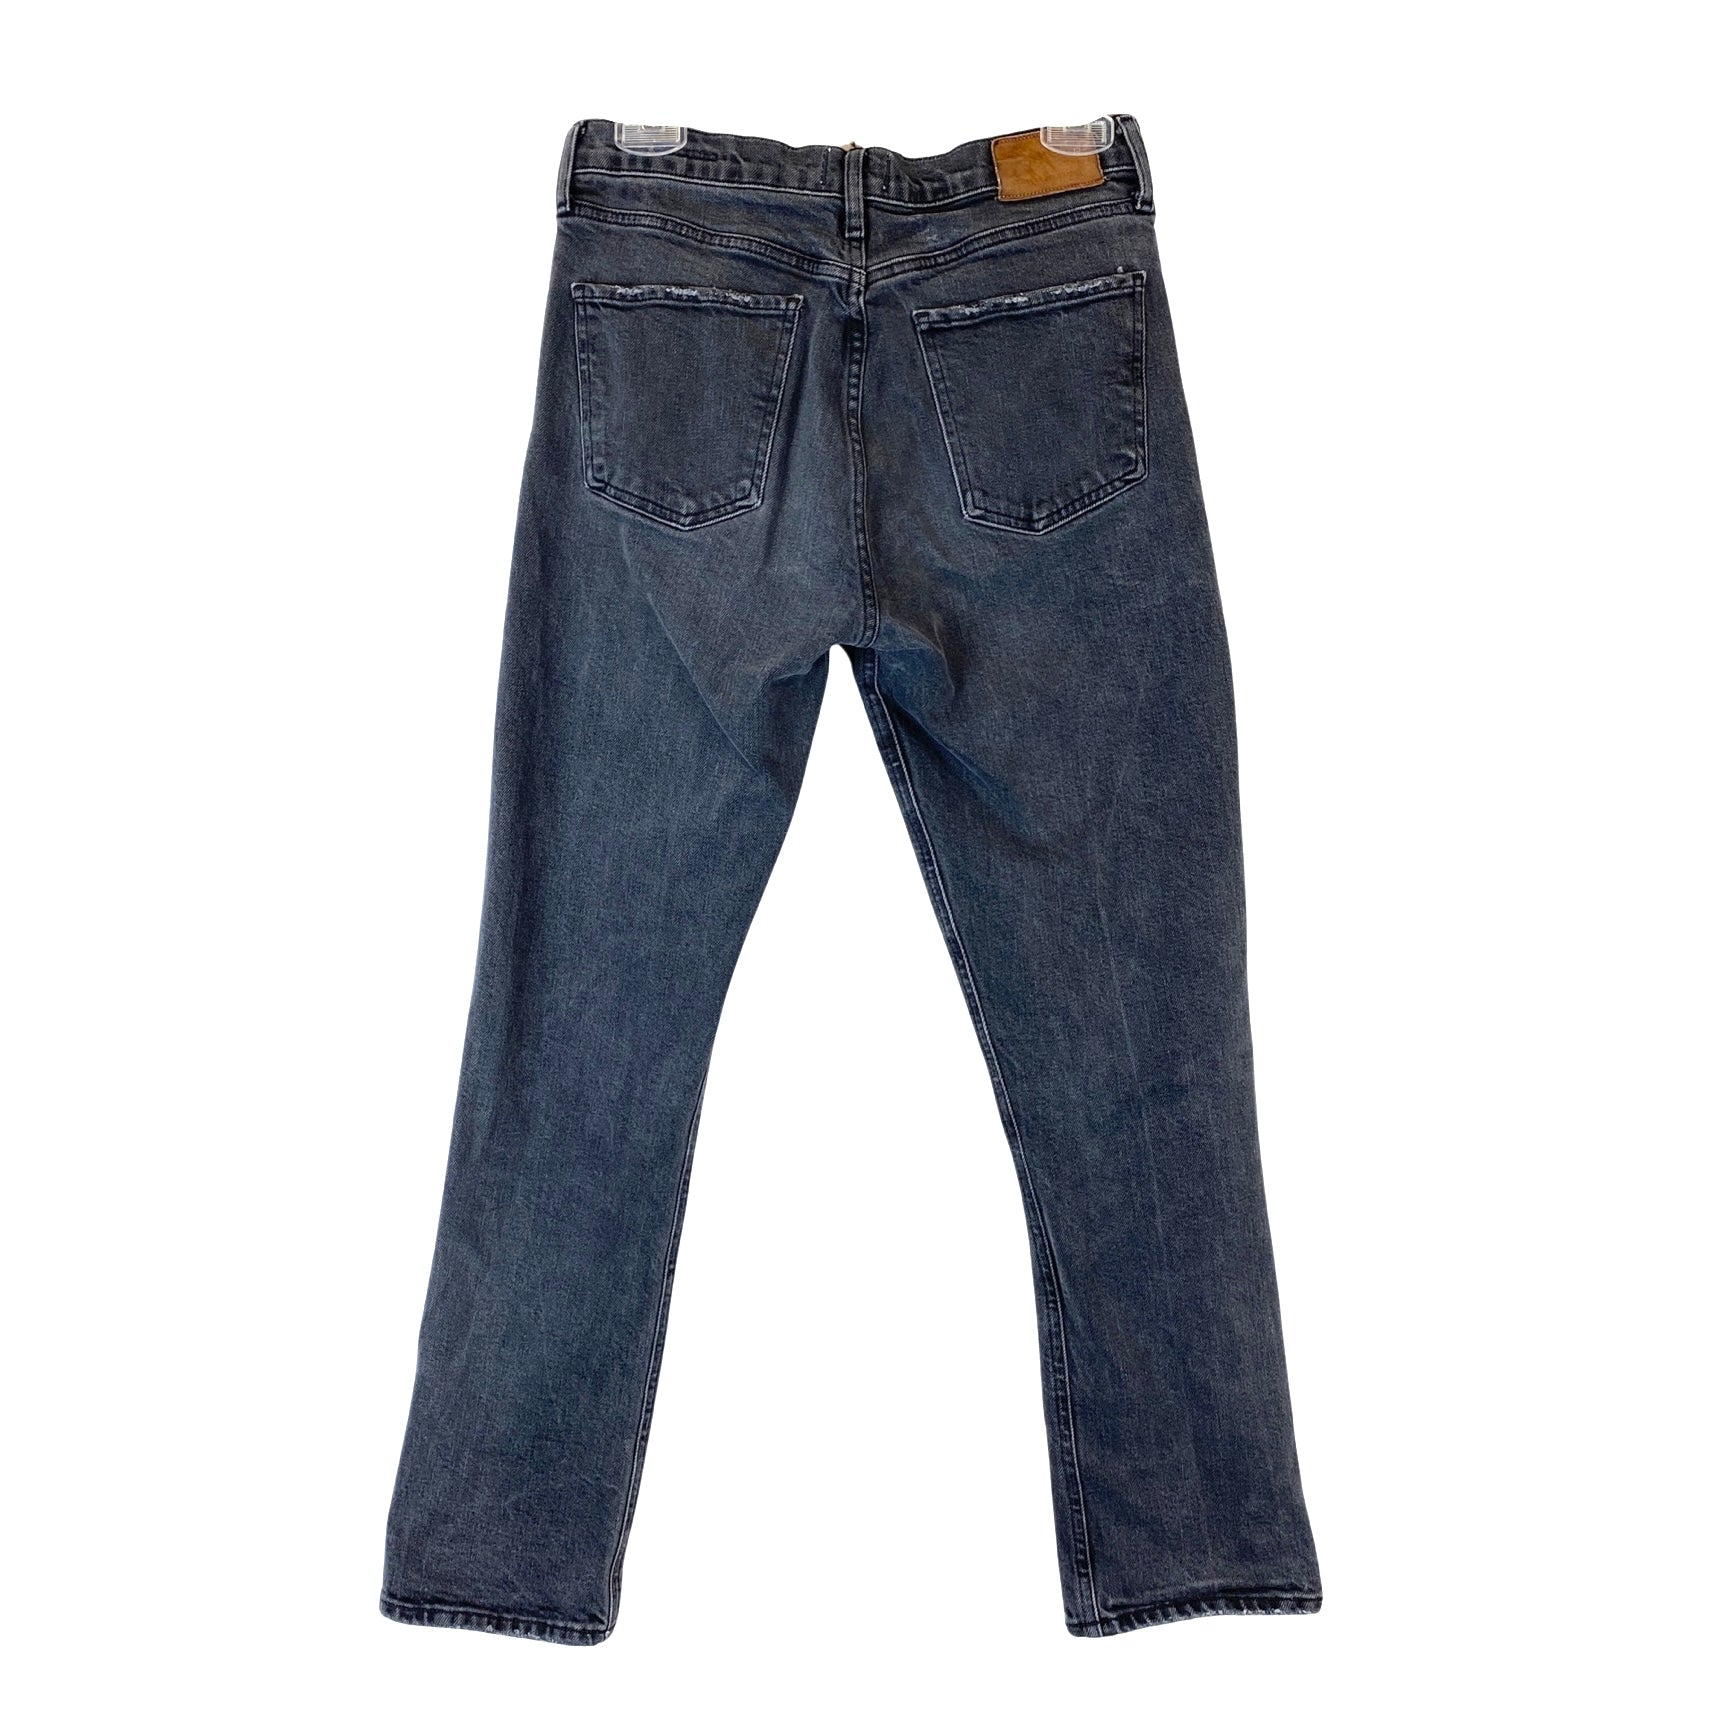 Citizens of Humanity Charlotte Straight Leg Jeans